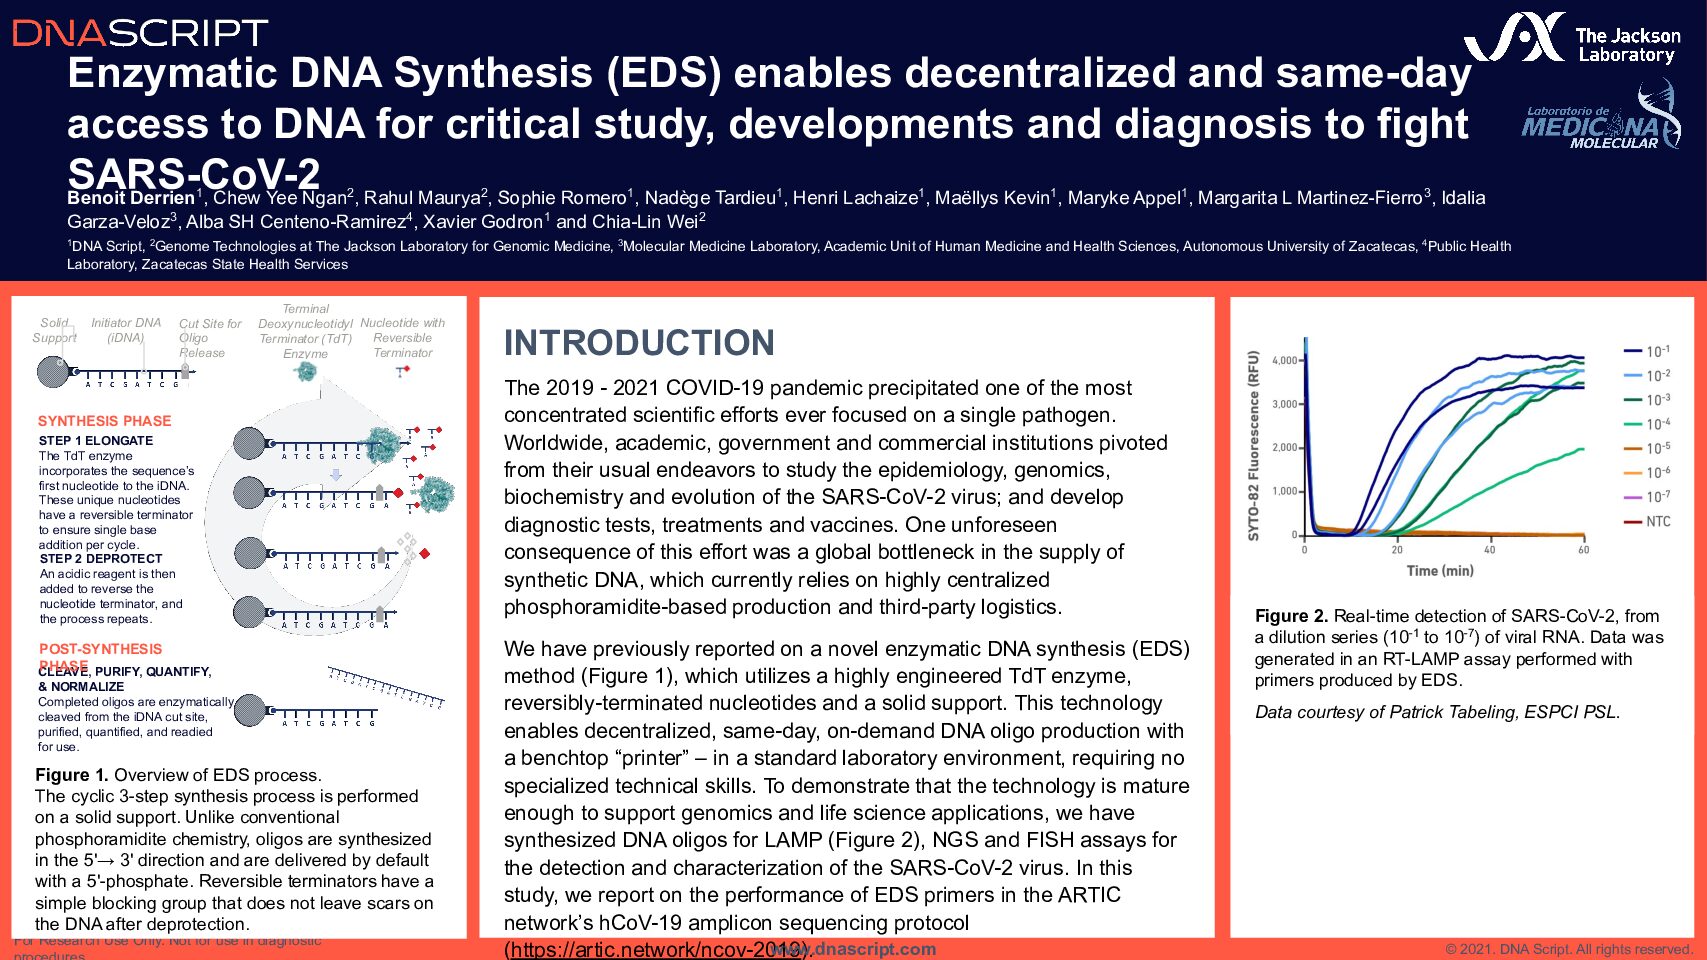 Enzymatic DNA Synthesis (EDS) enables decentralized and same-day access to DNA for critical study, developments and diagnosis to fight SARS-CoV-2